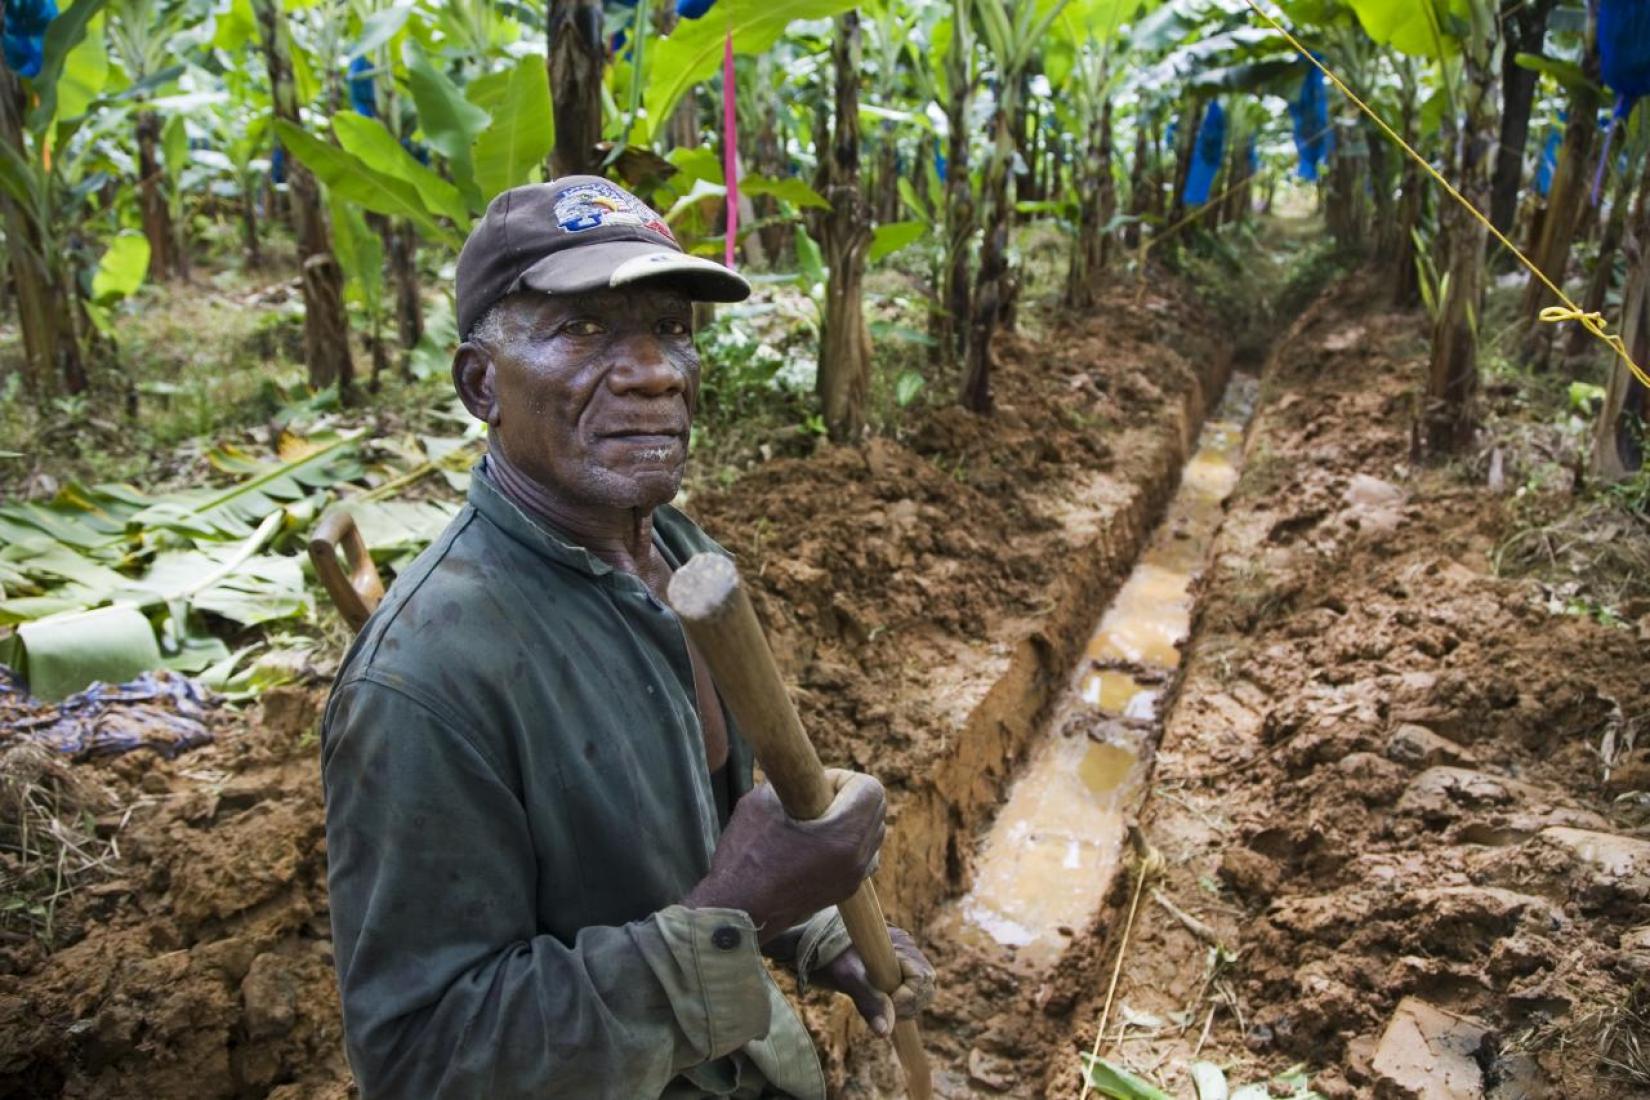 man holds hoe in a muddy banana patch in St. Lucia